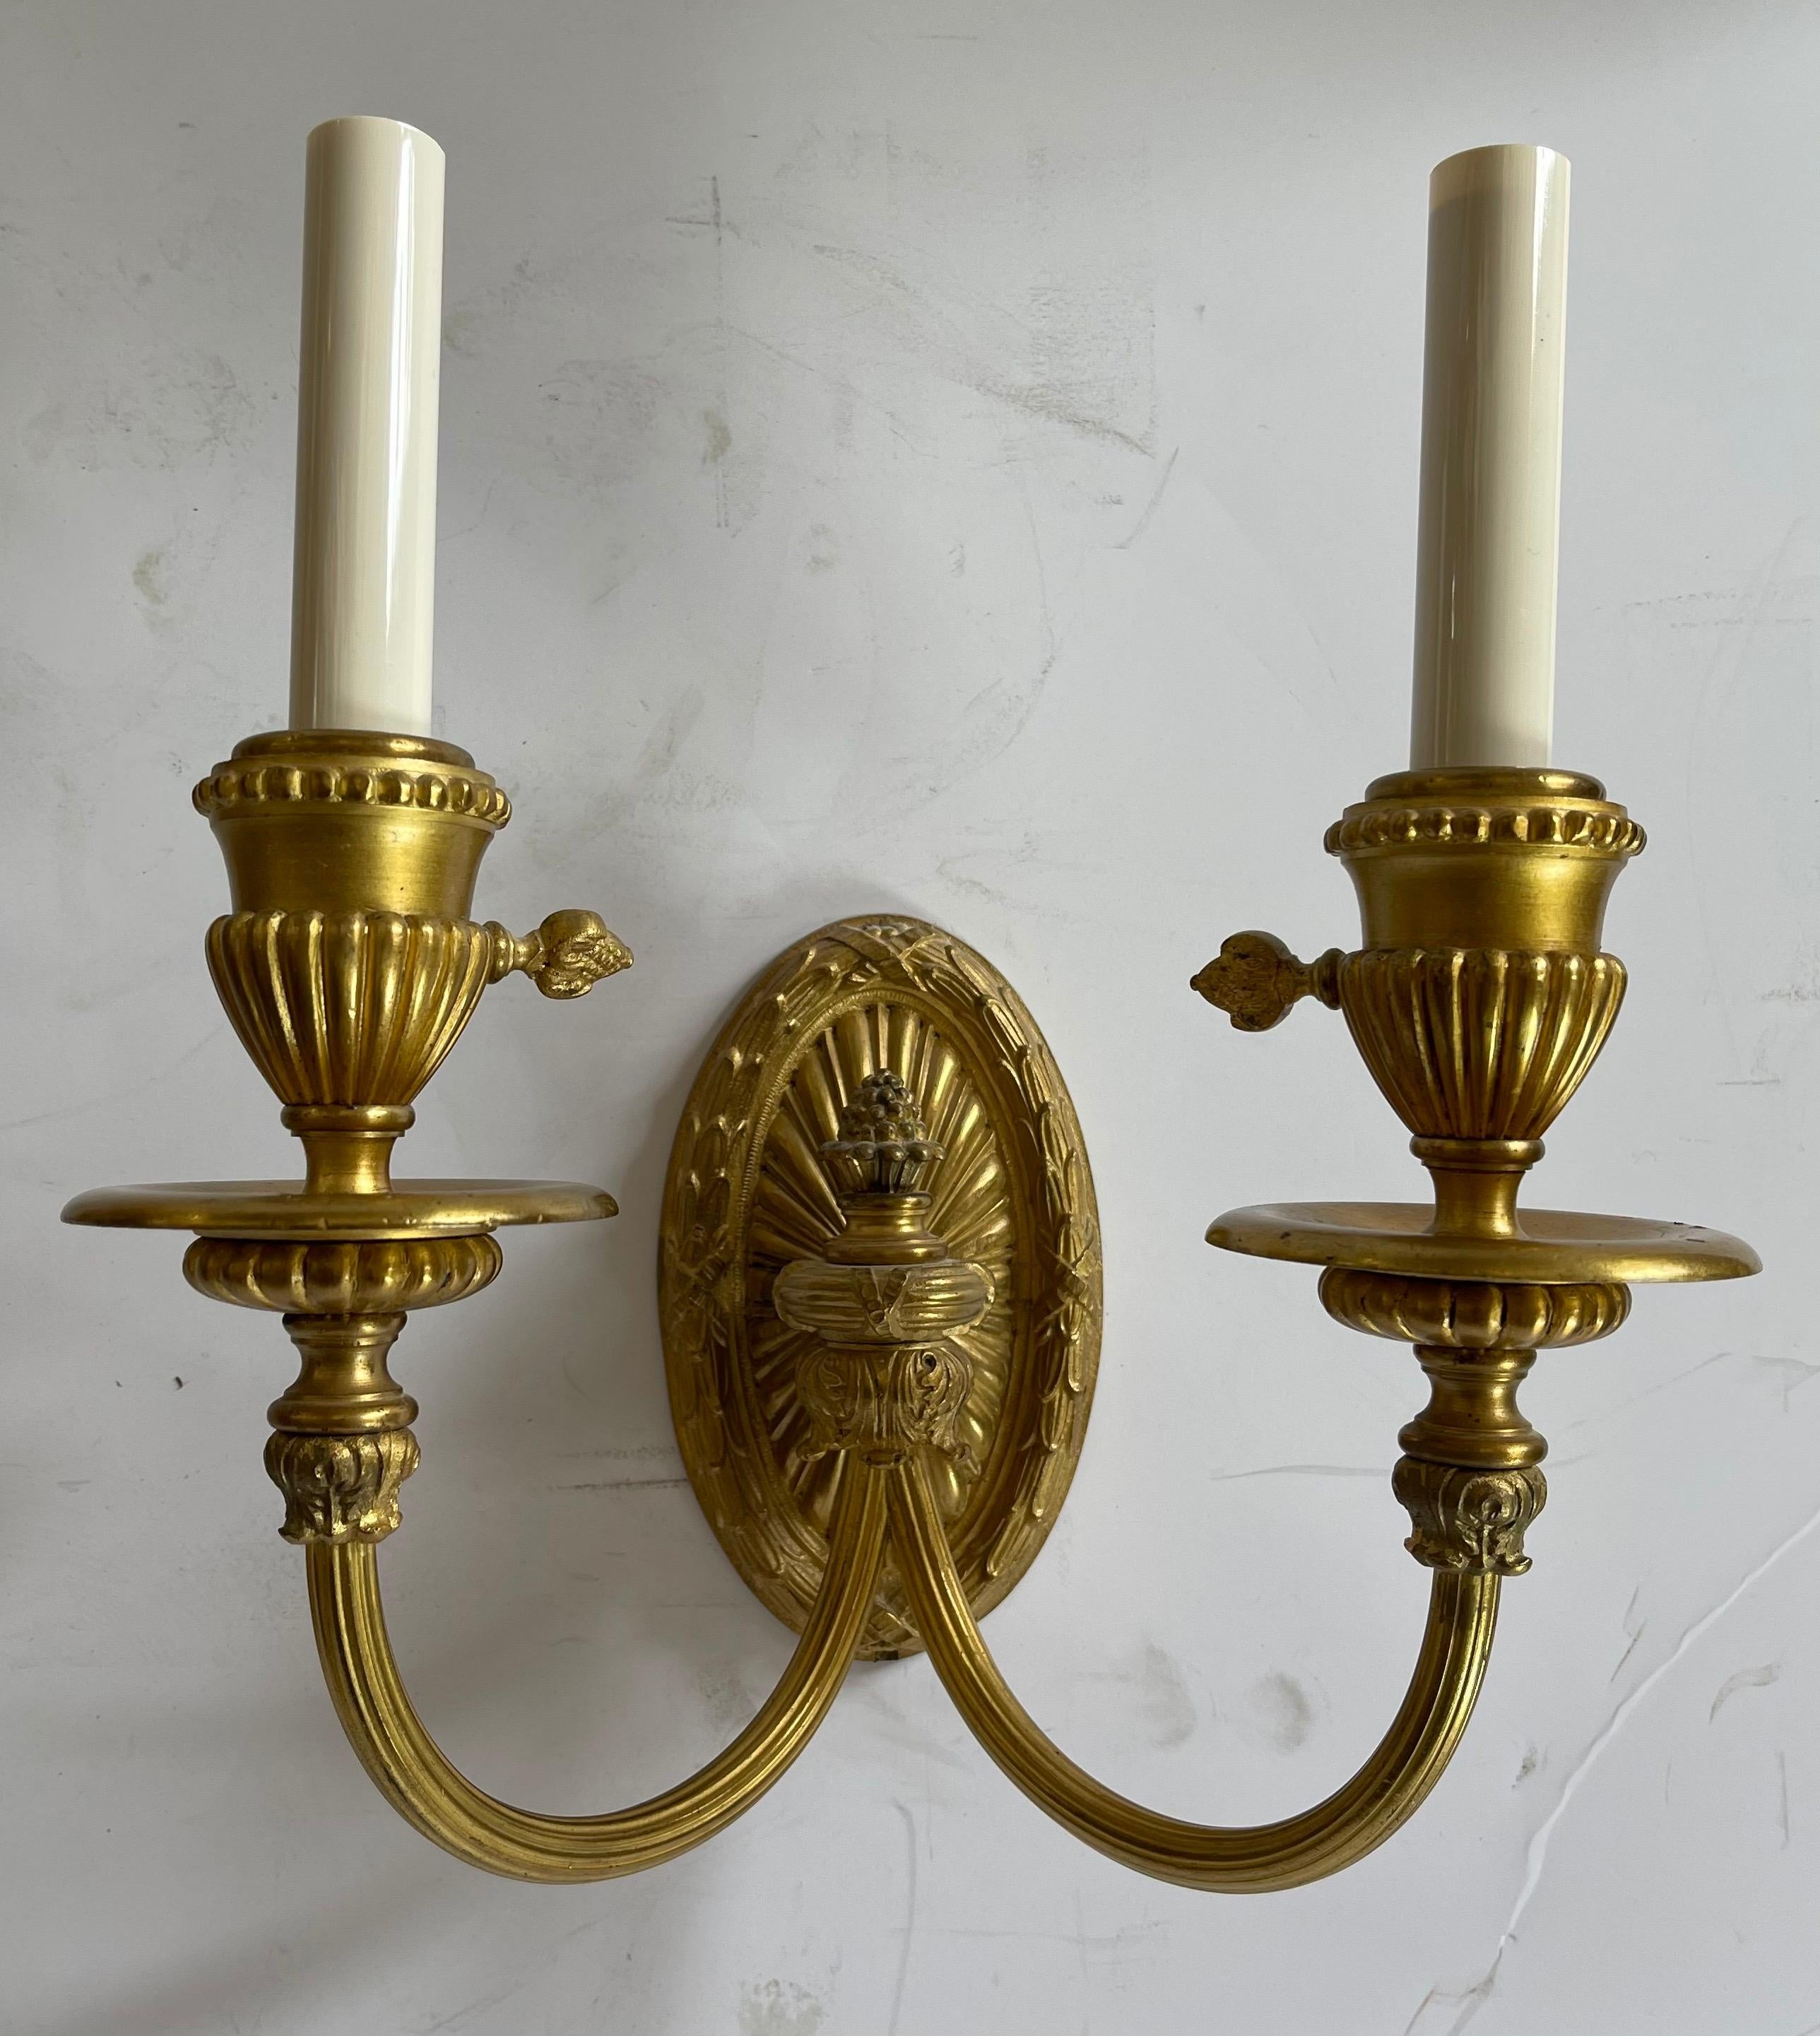 A wonderful Regency / neoclassical form pair of urn medallion dore bronze Empire two candelabra socket sconces in the manner of E.F. Caldwell
Rewired and ready to install with mounting brackets.